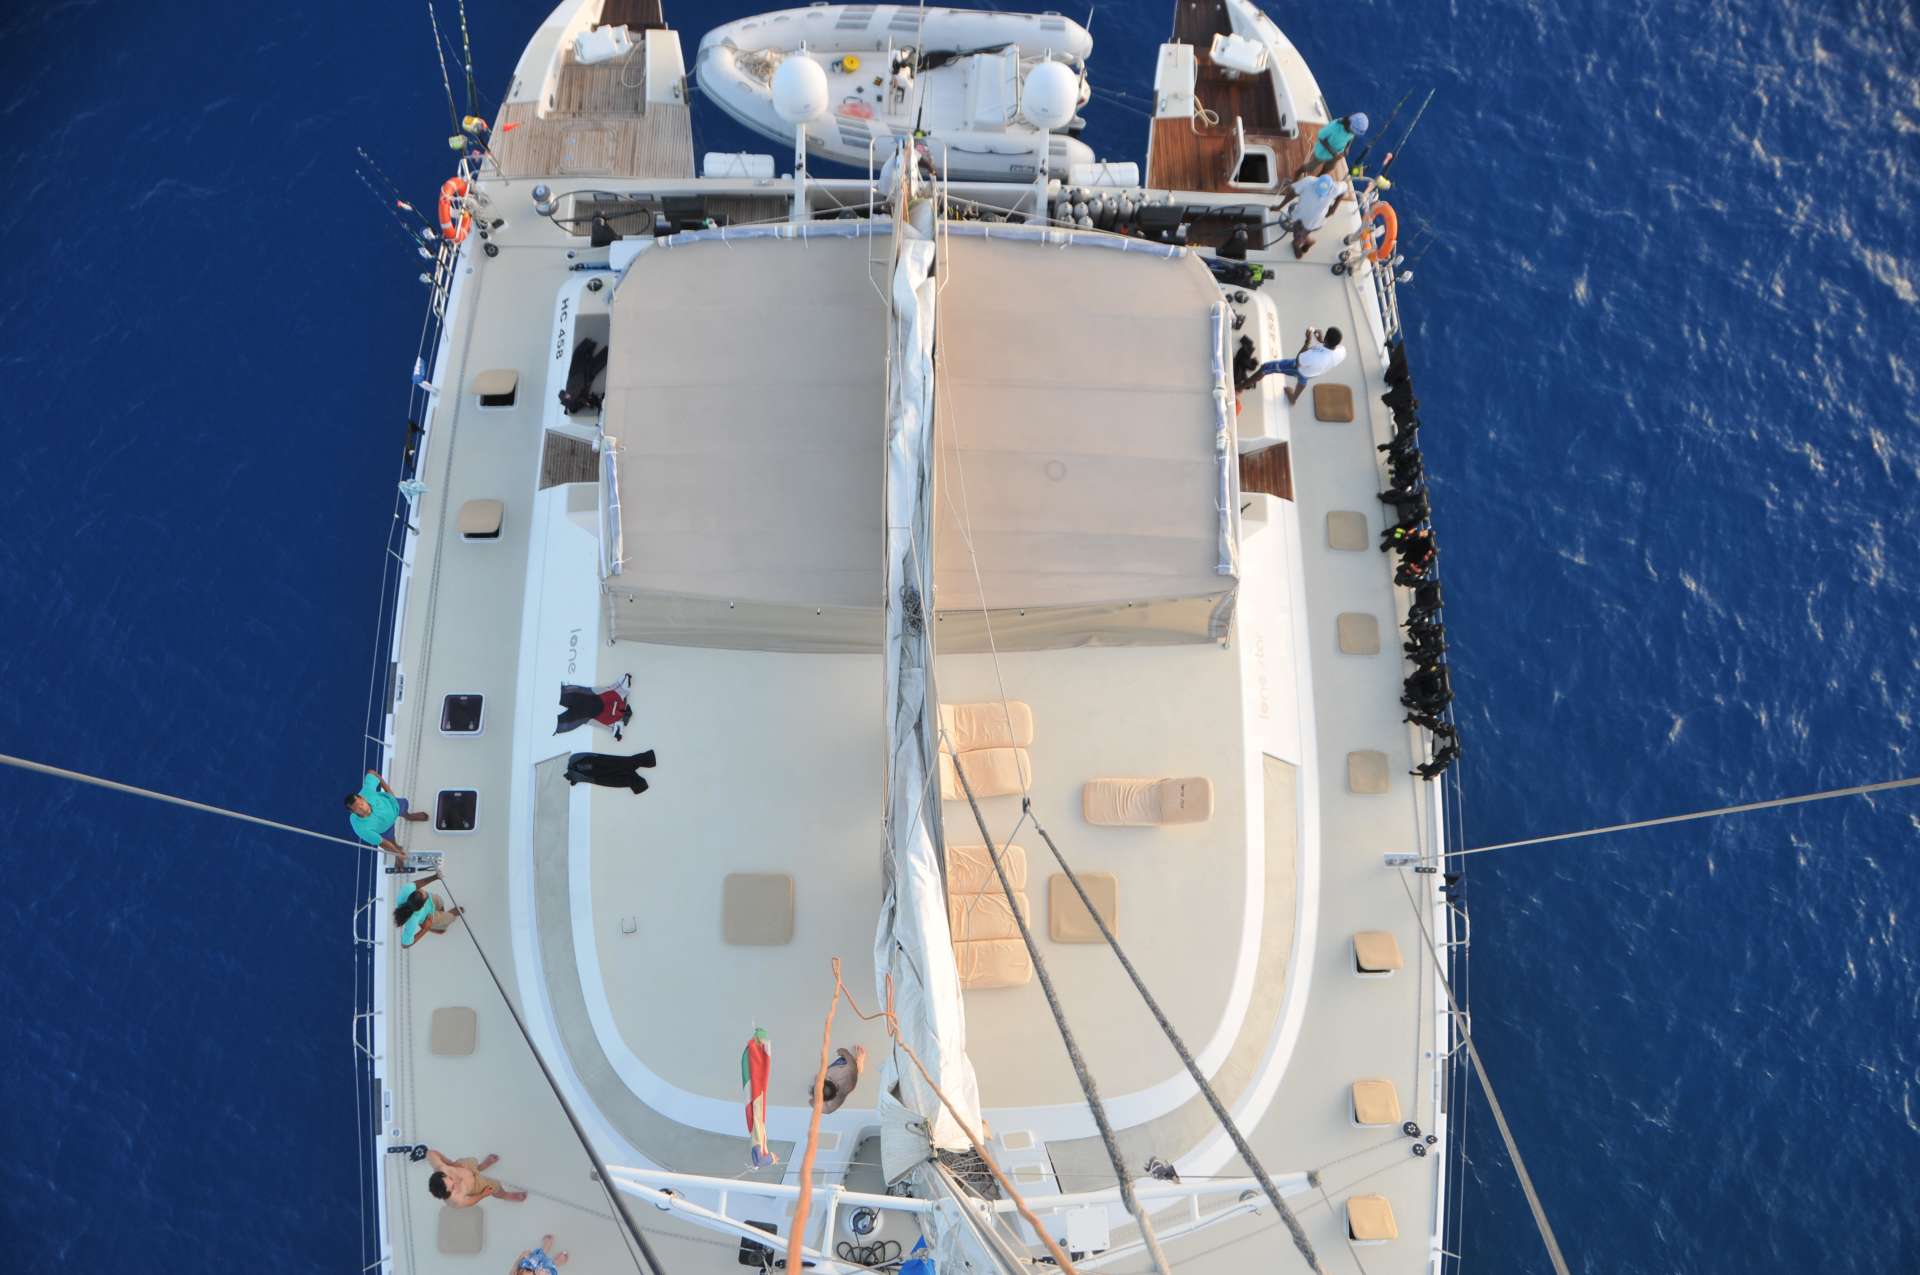 LONESTAR Yacht Charter - LONESTAR offers over 2,500 sq ft of deck space